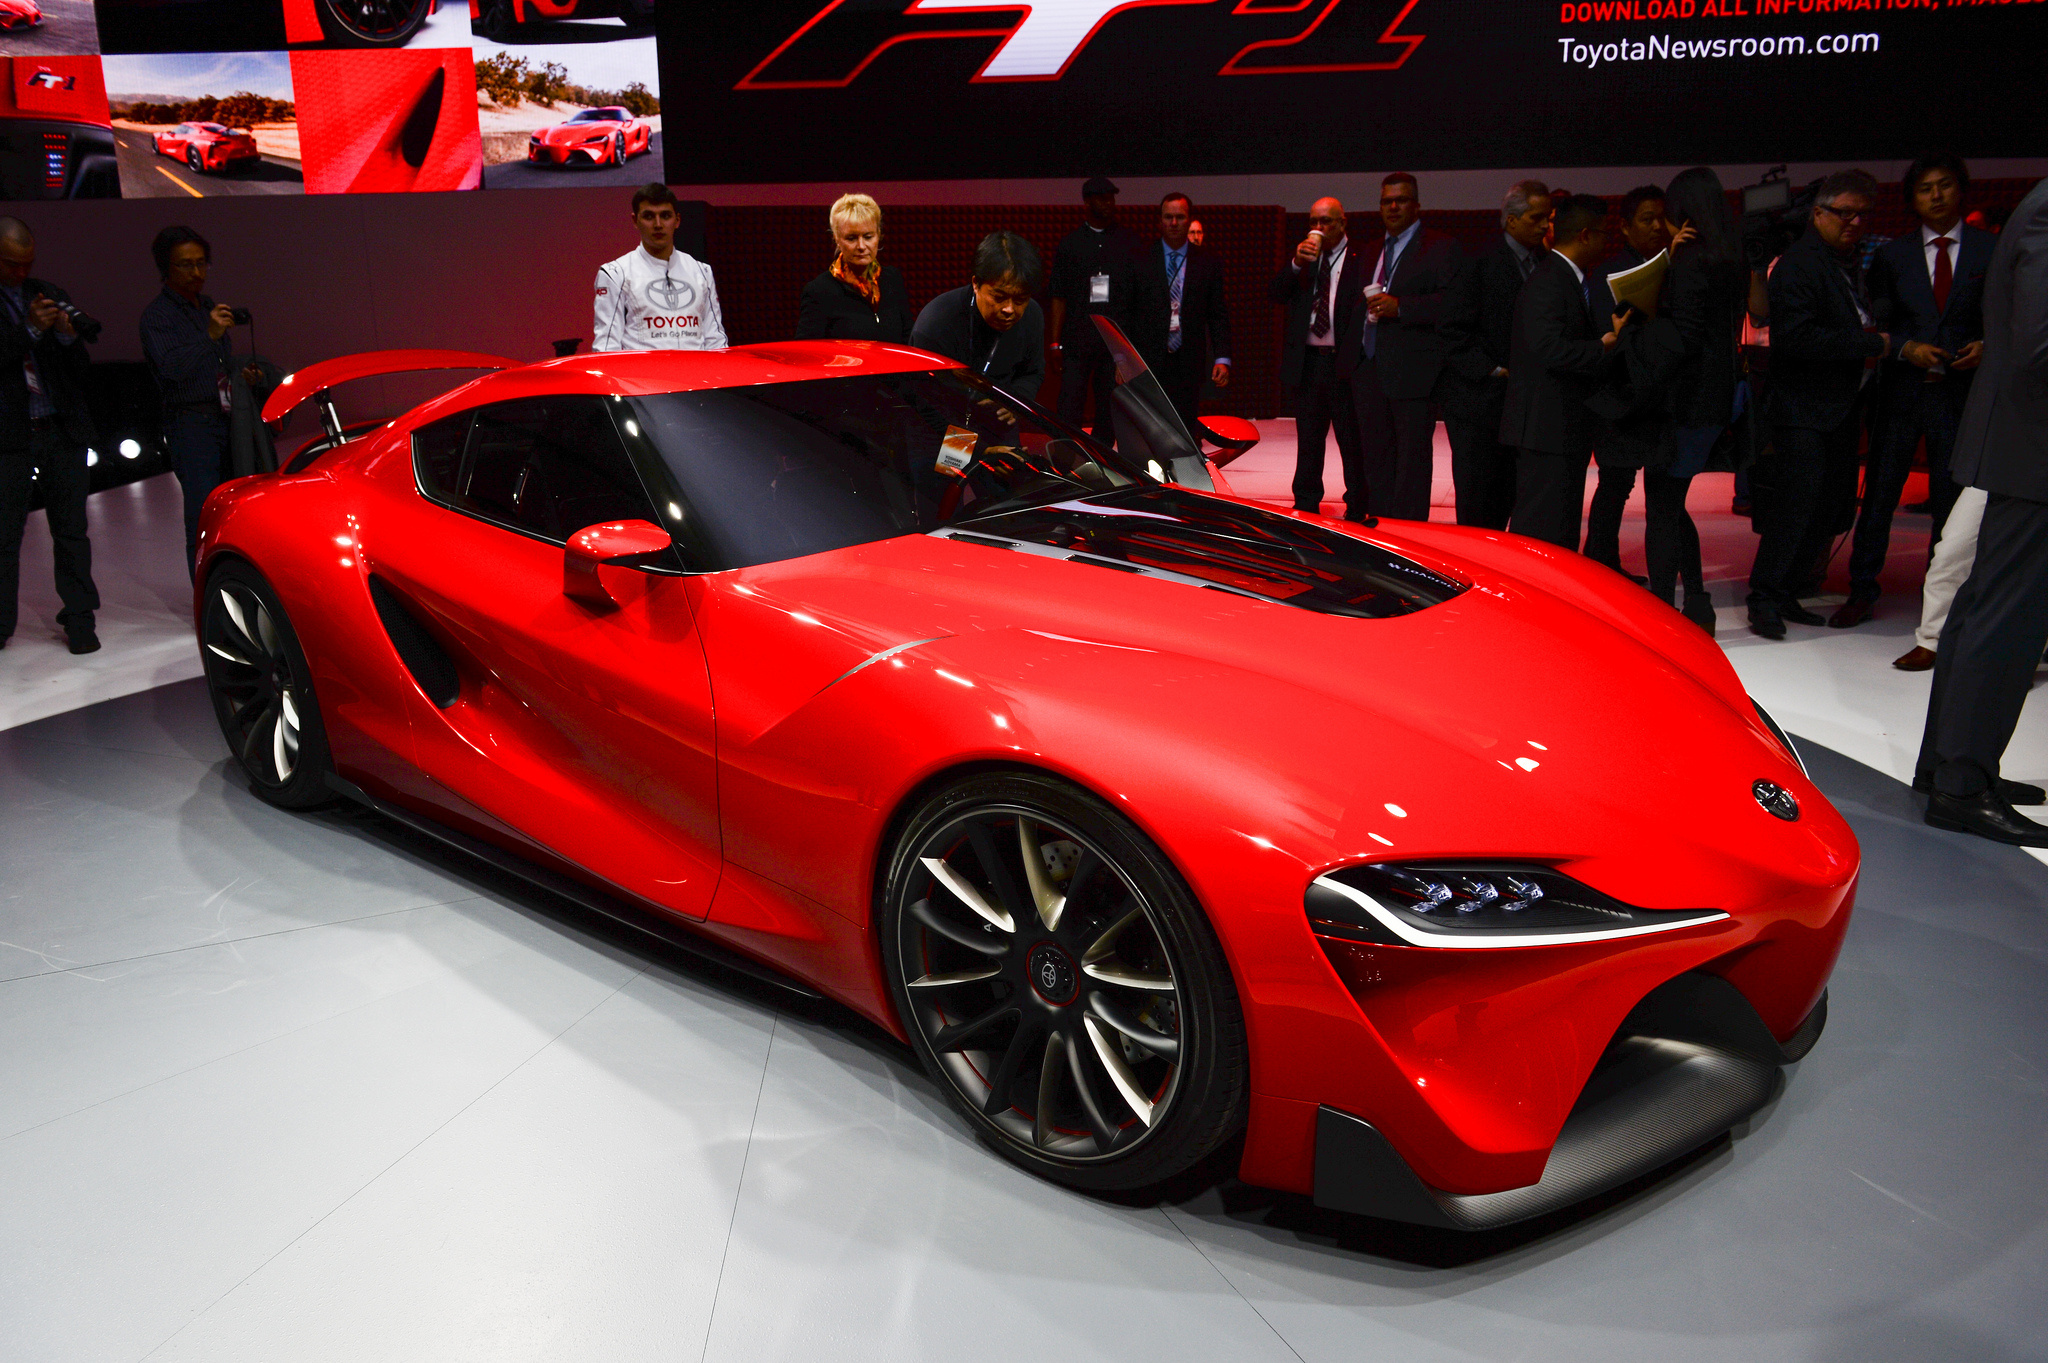 Car Concept Car Red Car Supercar Toyota Toyota Ft 1 Vehicle 2048x1363